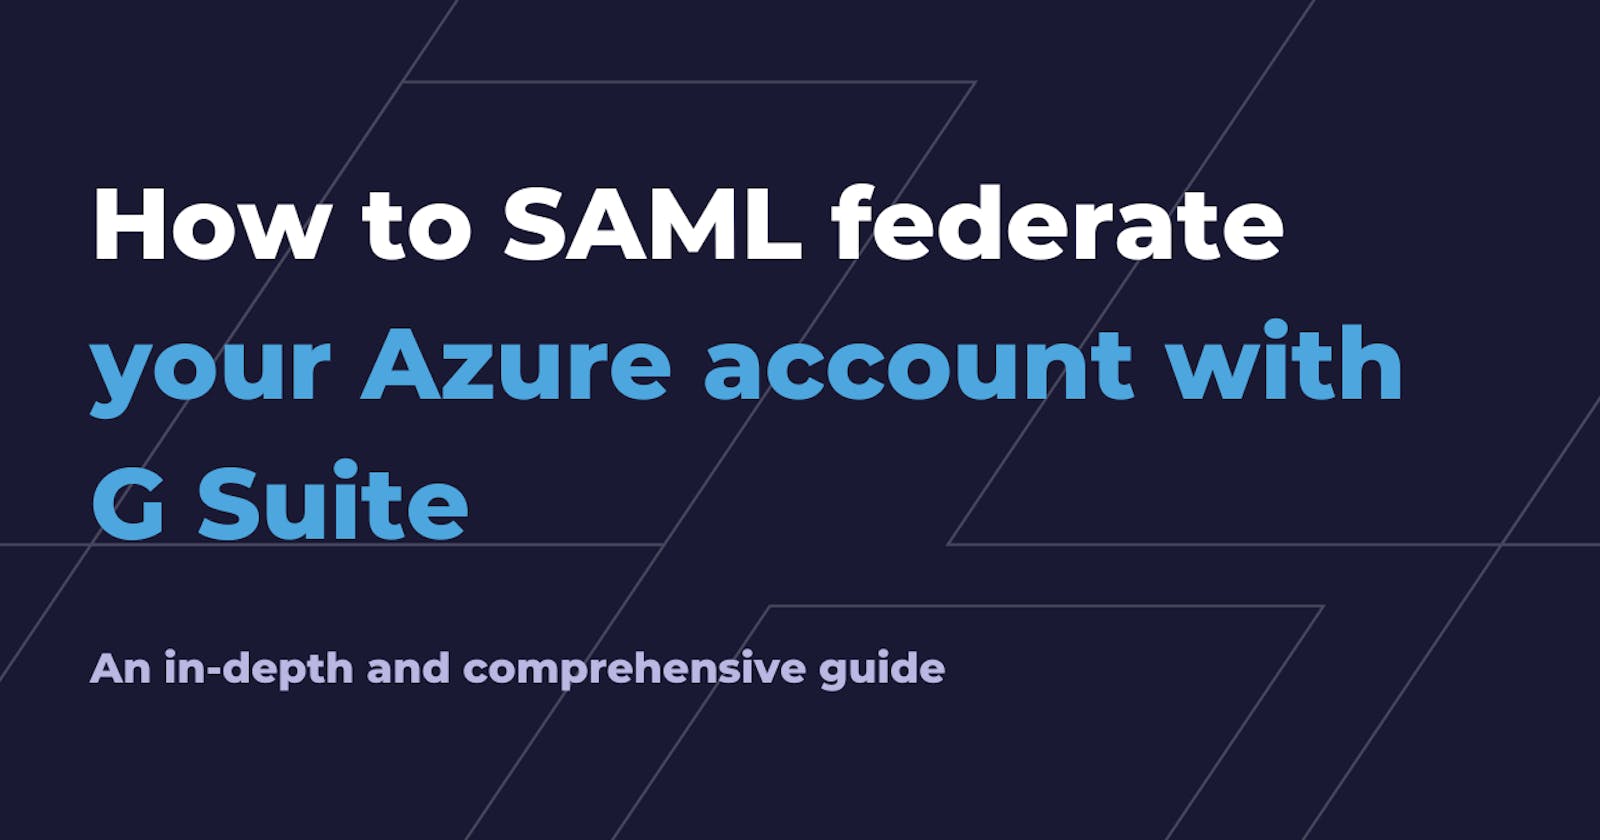 How to SAML federate your Azure account with G Suite